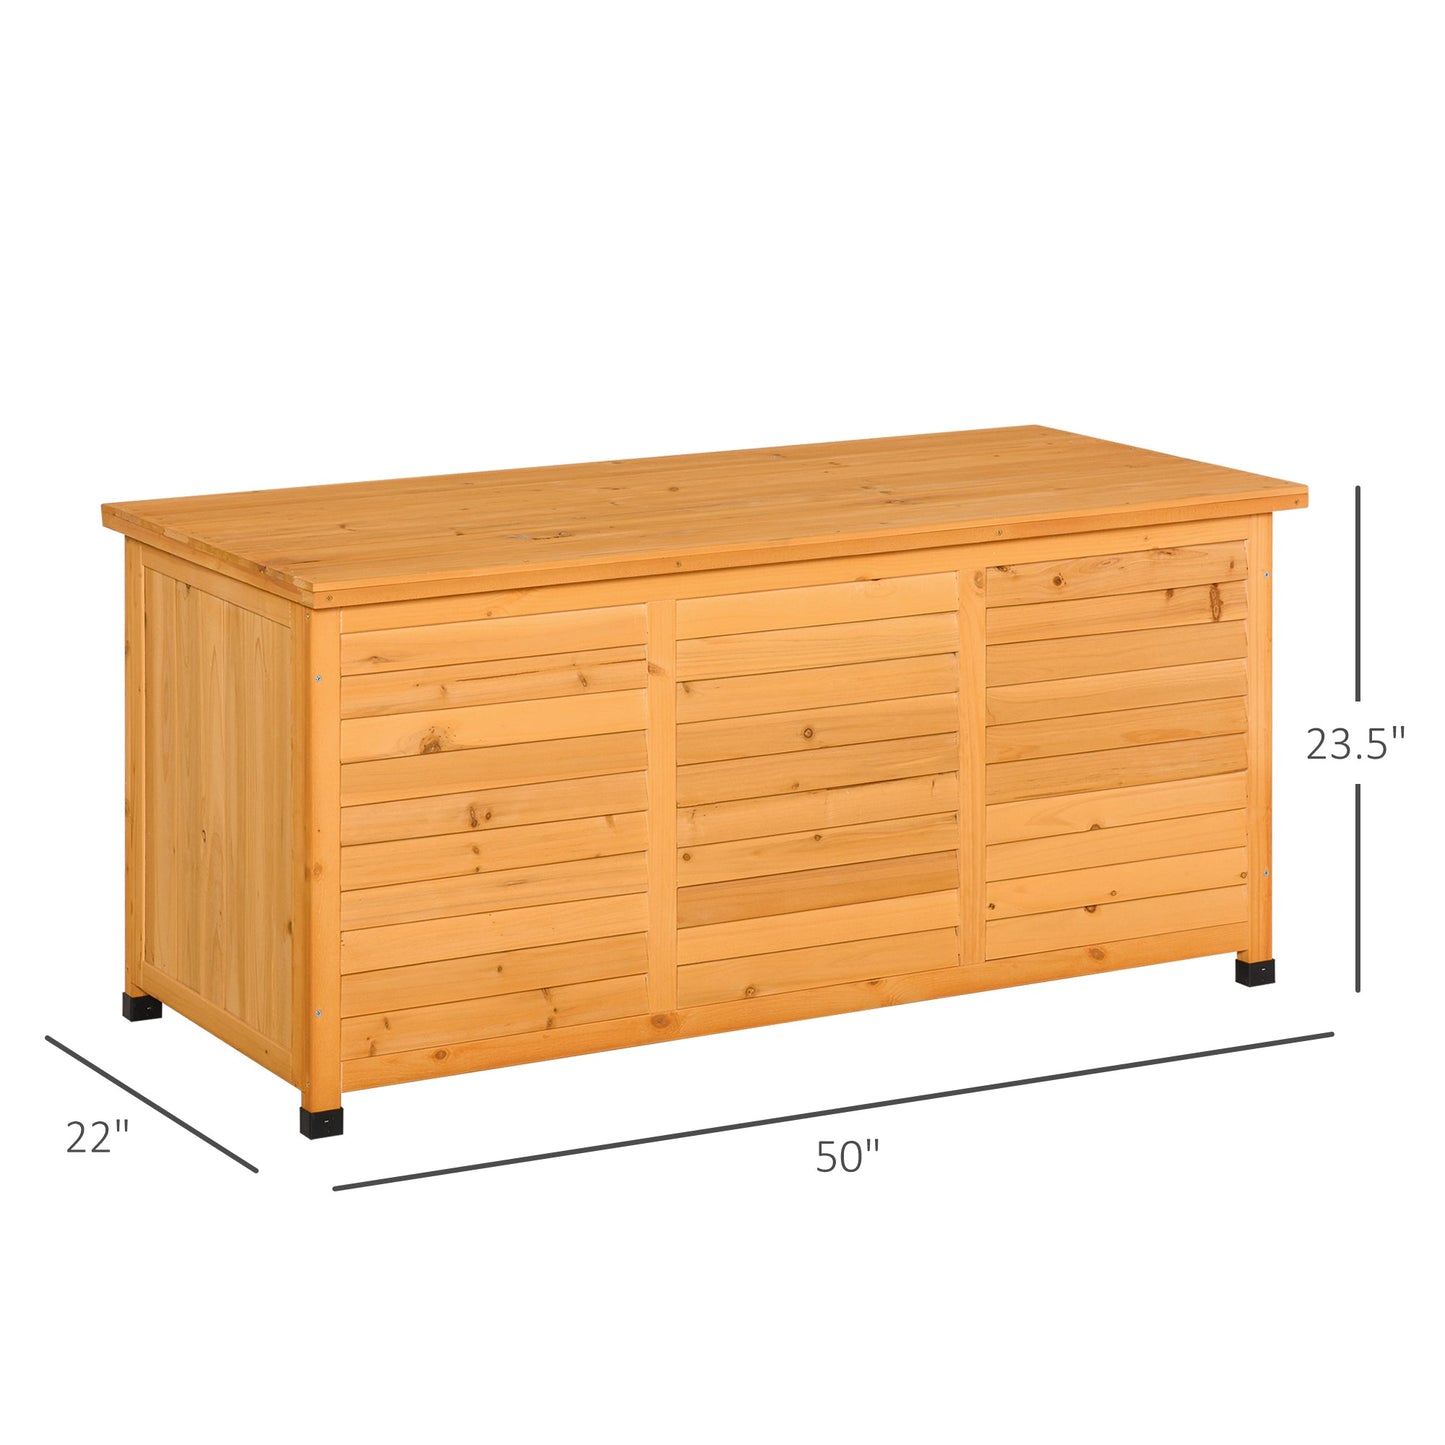 -Outsunny 75 Gallon Wooden Deck Box, Outdoor Storage Container with Aerating Gap & Weather-Fighting Finish, Yellow - Outdoor Style Company